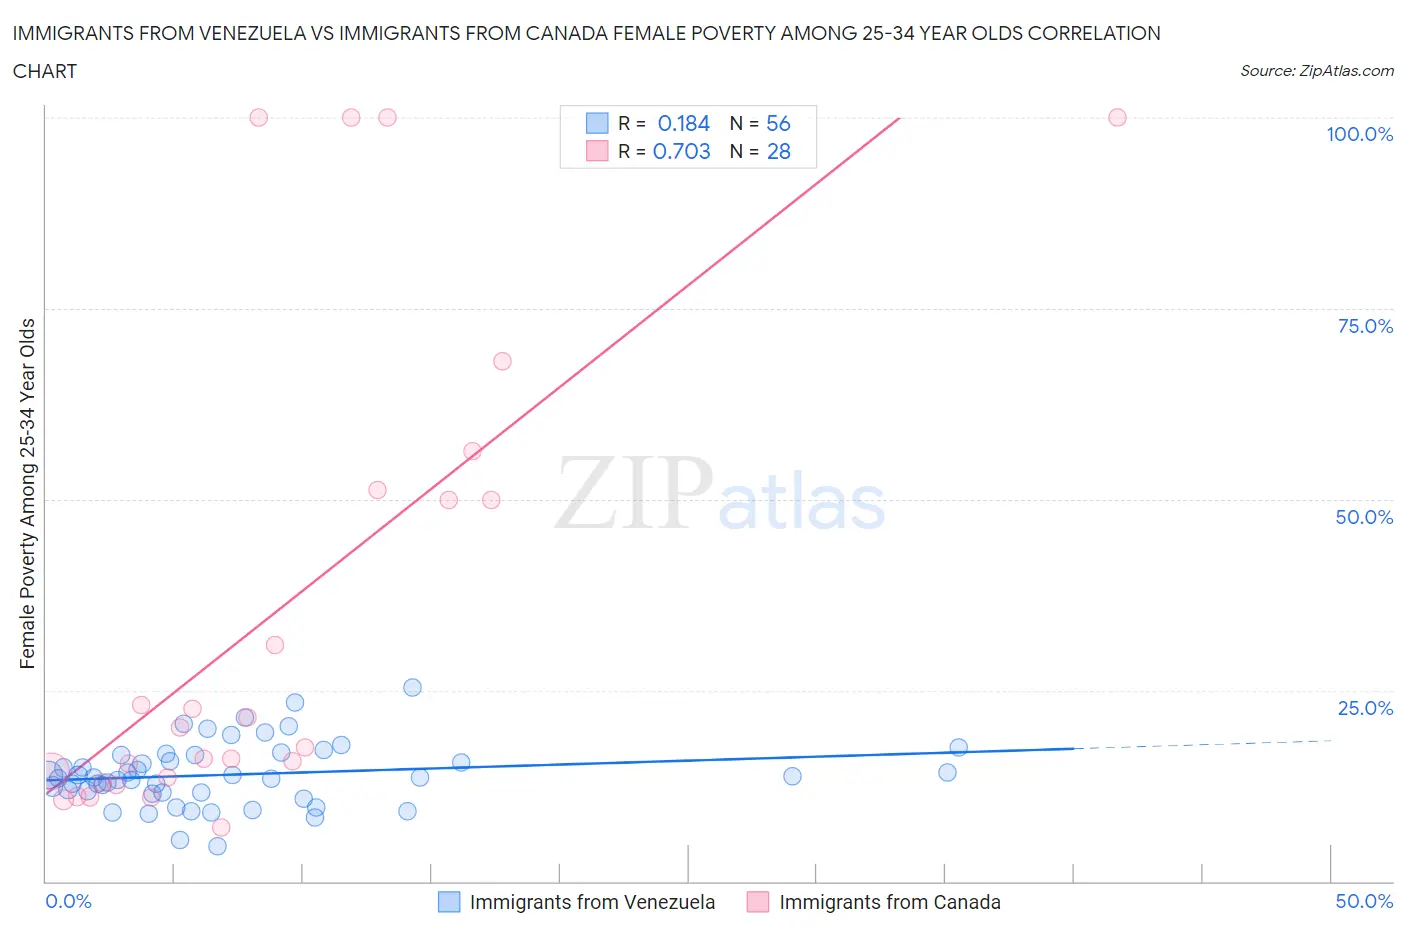 Immigrants from Venezuela vs Immigrants from Canada Female Poverty Among 25-34 Year Olds